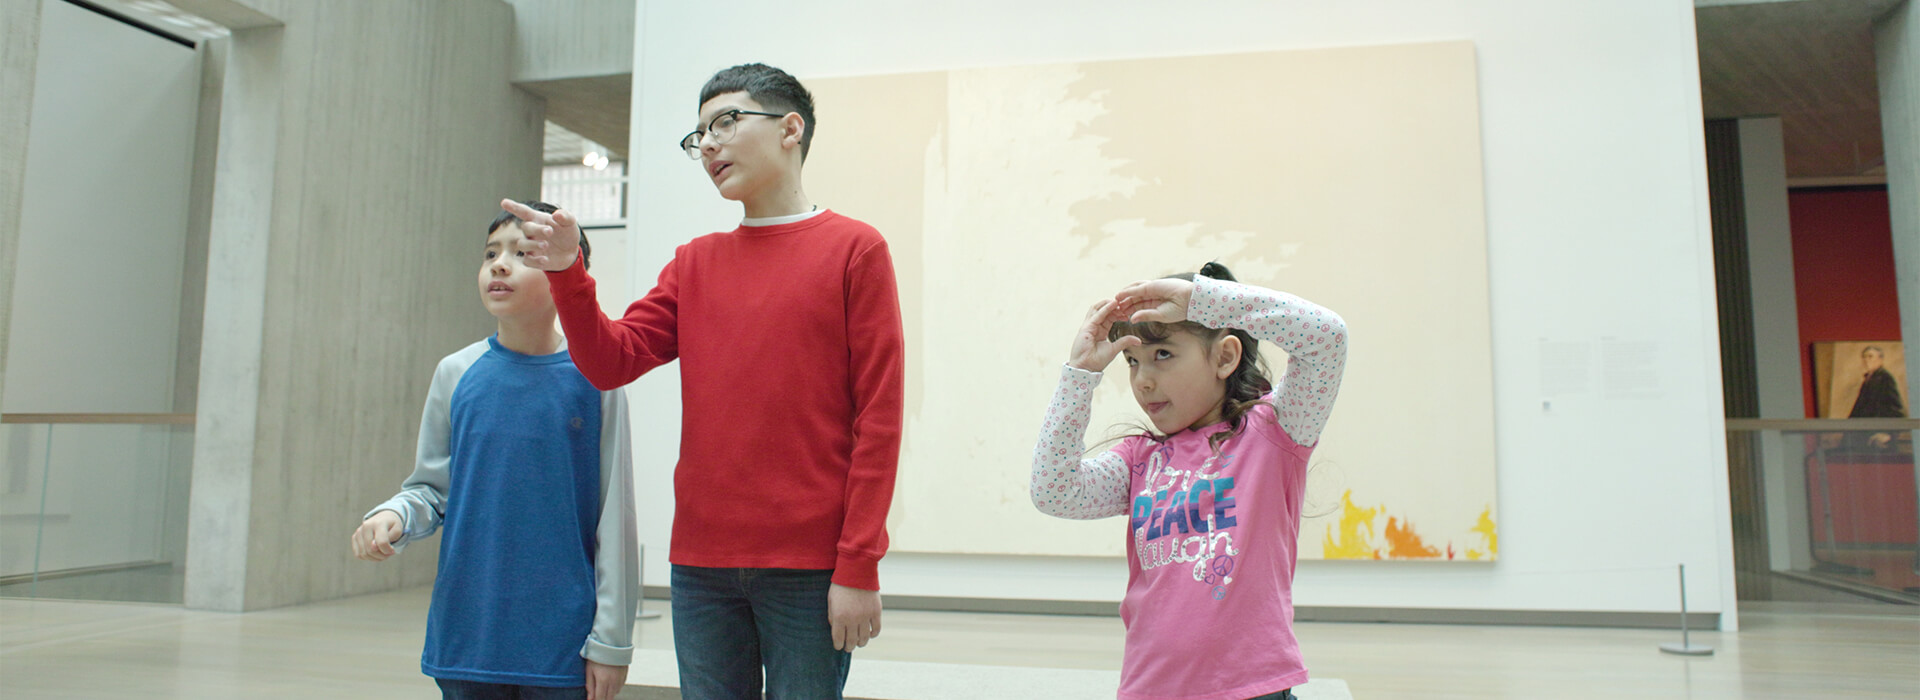 Three children look at a painting in a gallery, the boys point while the girl makes a circle shape with her hands on her forehead